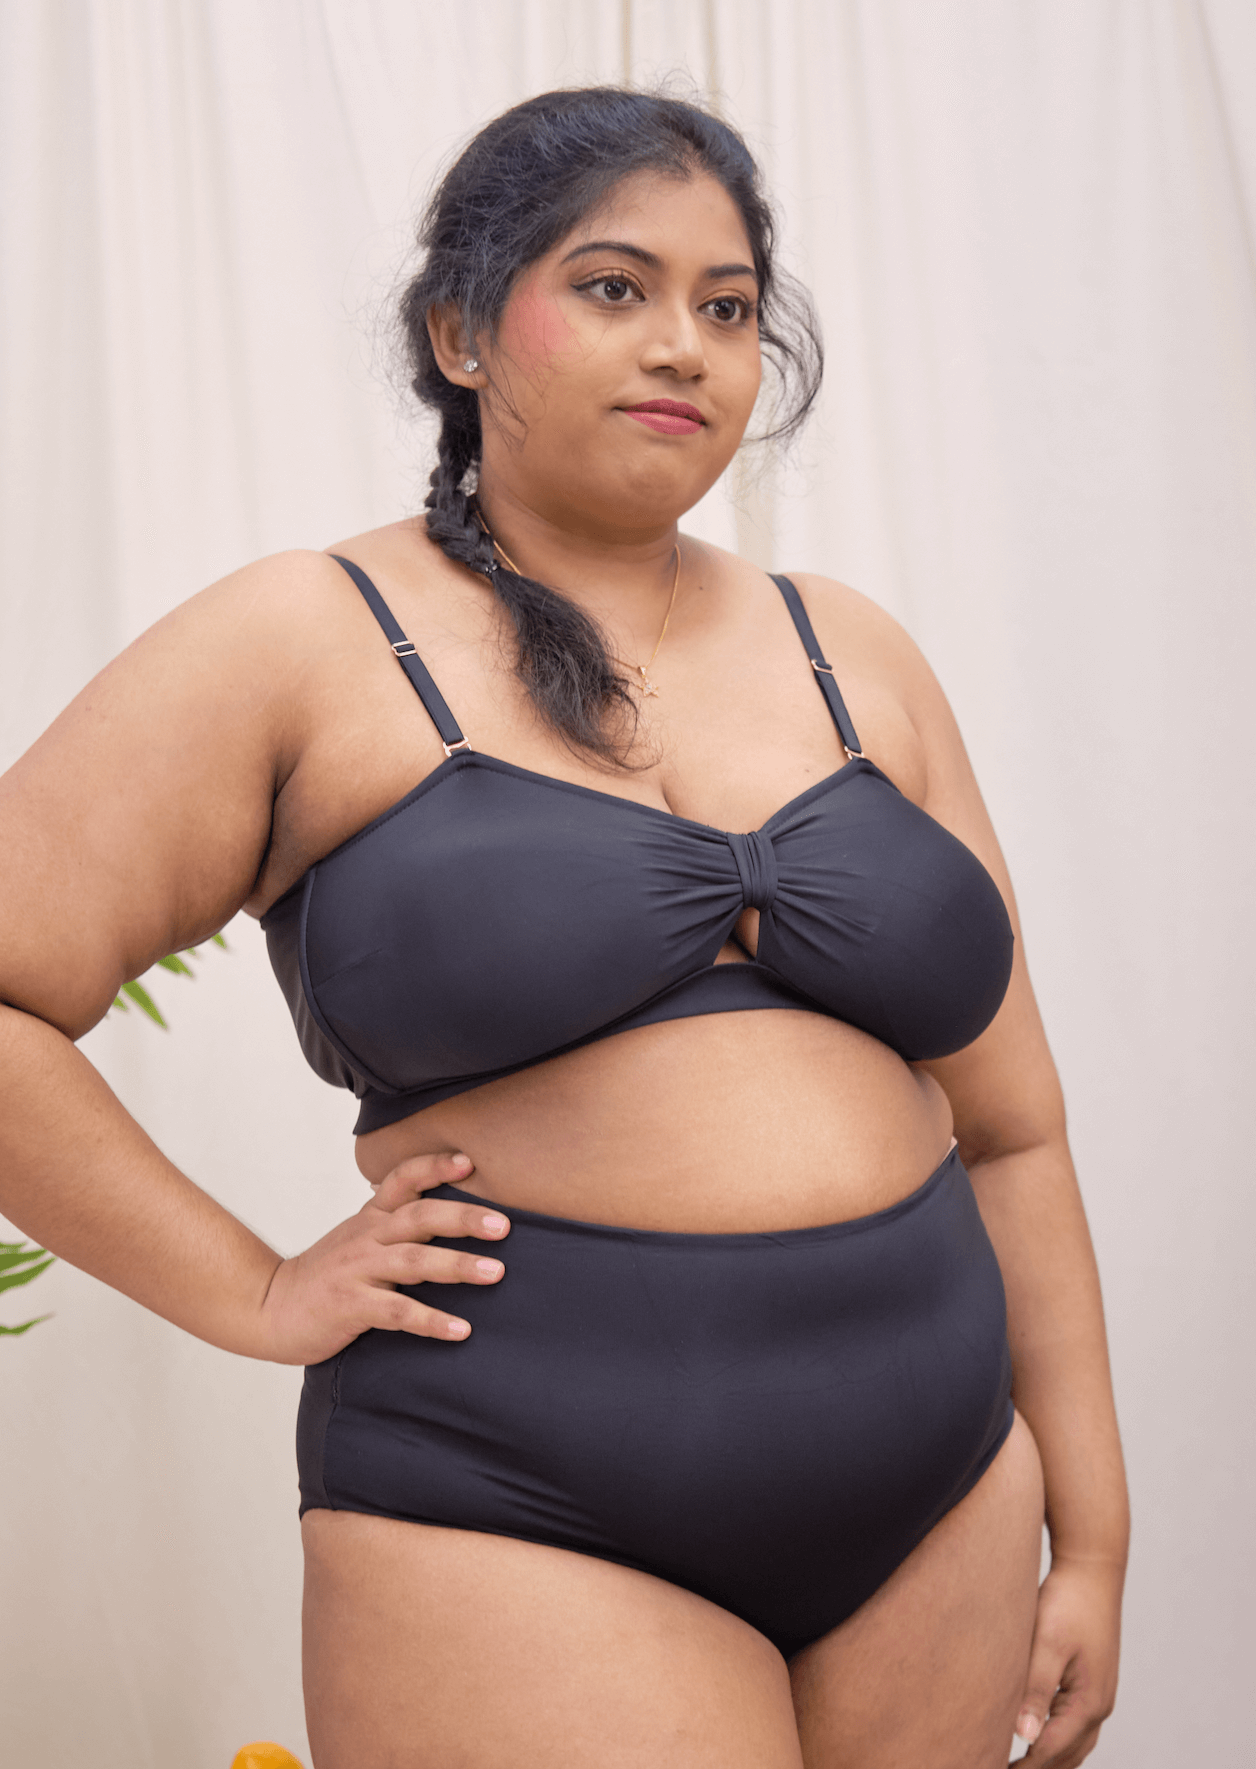 knotty padded strapless bralette in #100 – Our Bralette Club